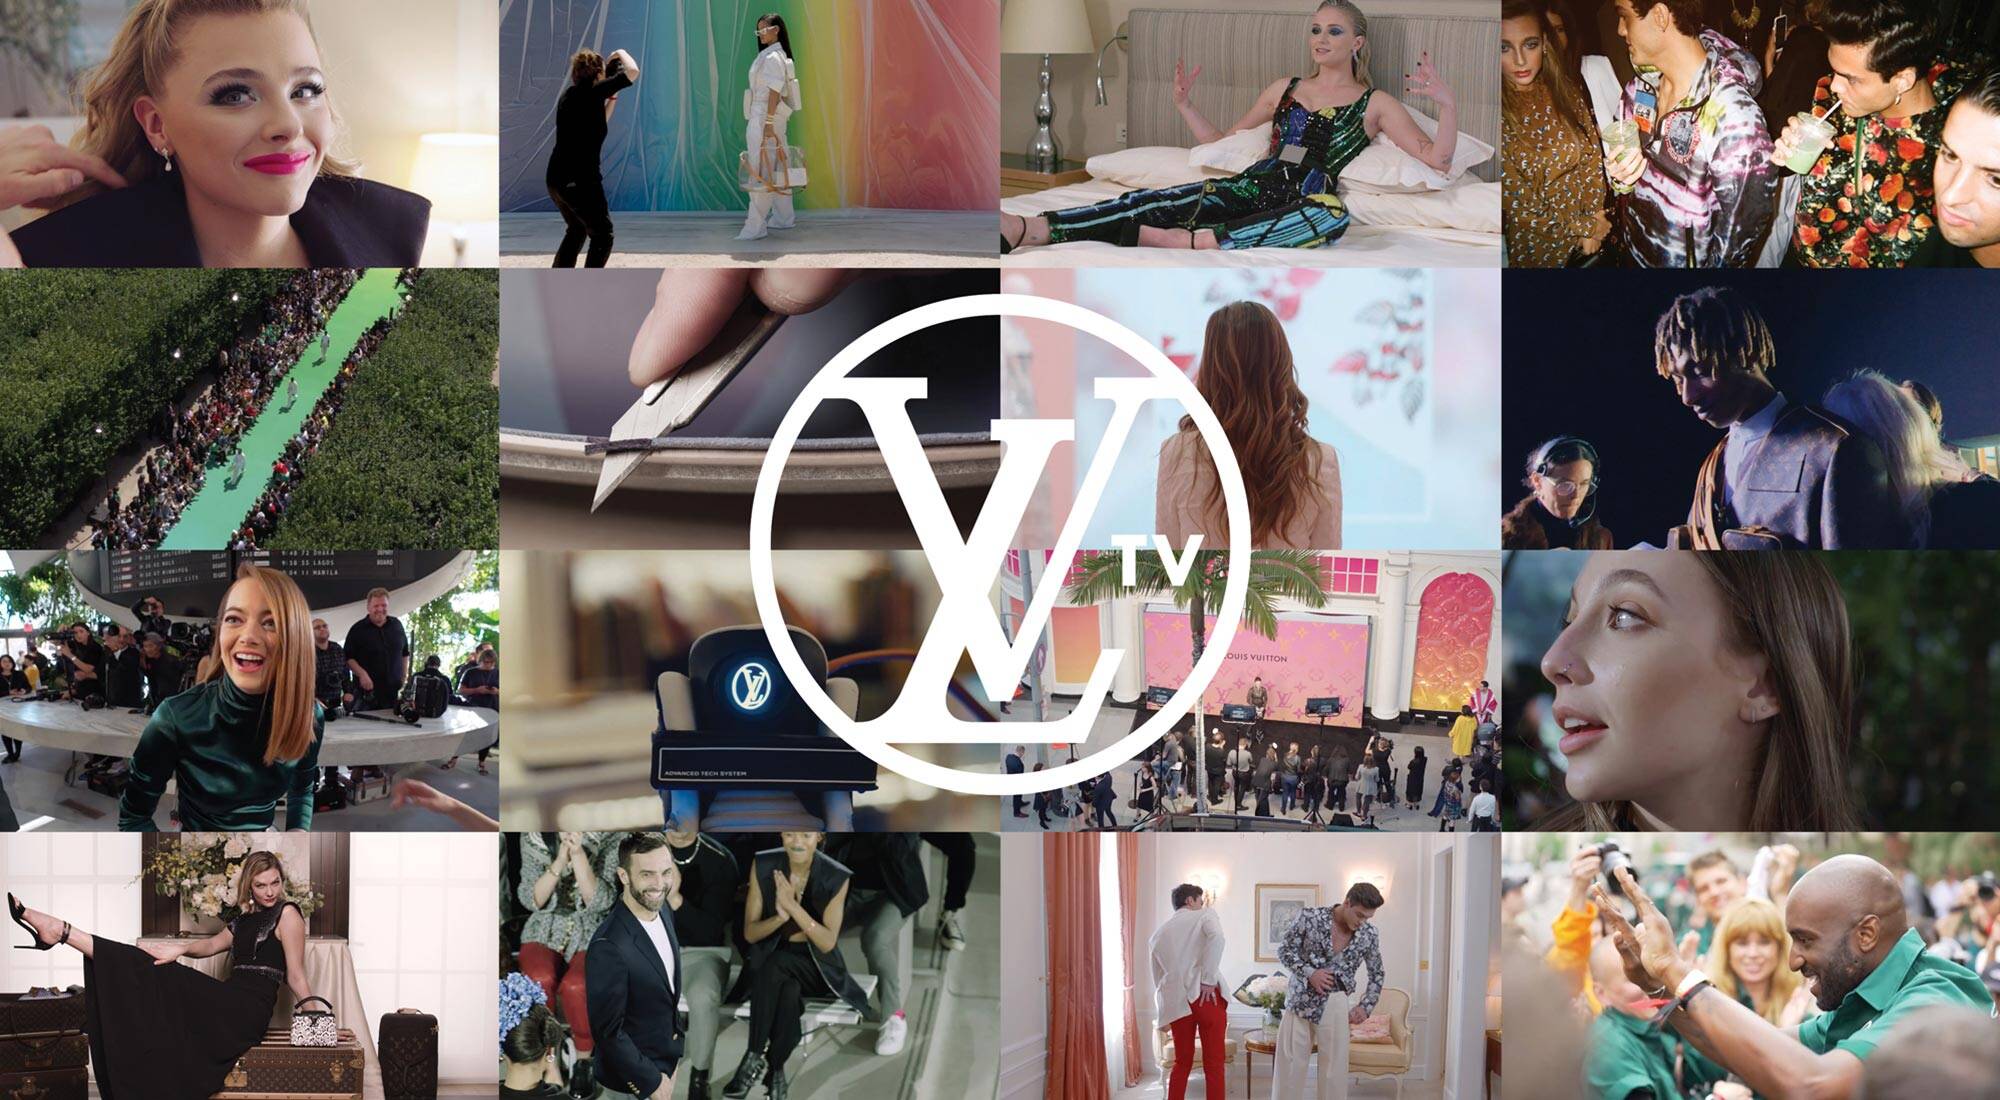 LOUIS VUITTON UNVEILS ITS NEW DIGITAL CAMPAIGN DEDICATED TO THE LV